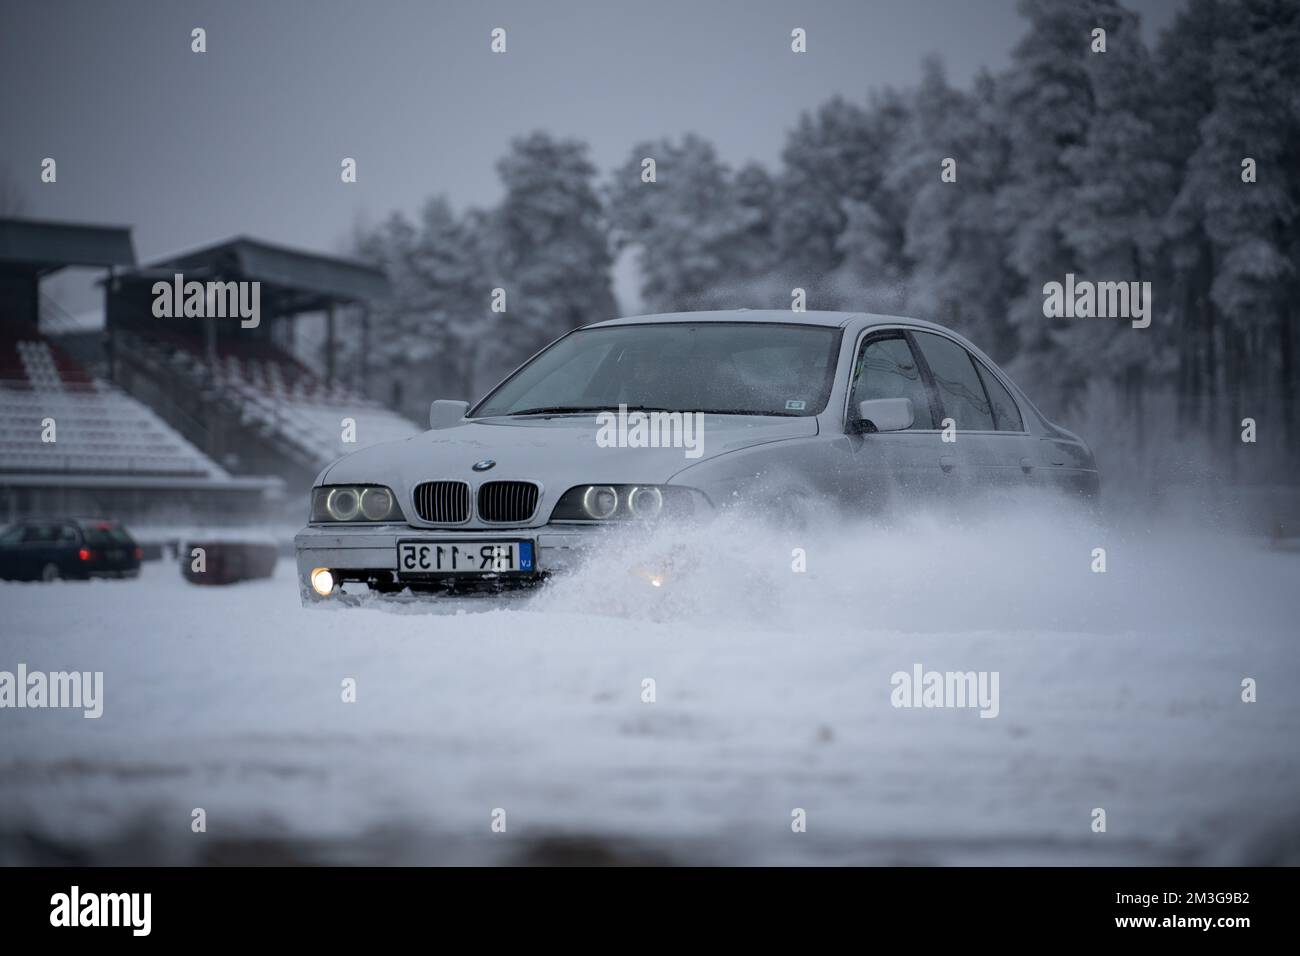 12-12-2022 Riga, Latvia  a car driving through a snow covered parking lot in the snow with trees in the background and a snow bank in the foreground. Stock Photo